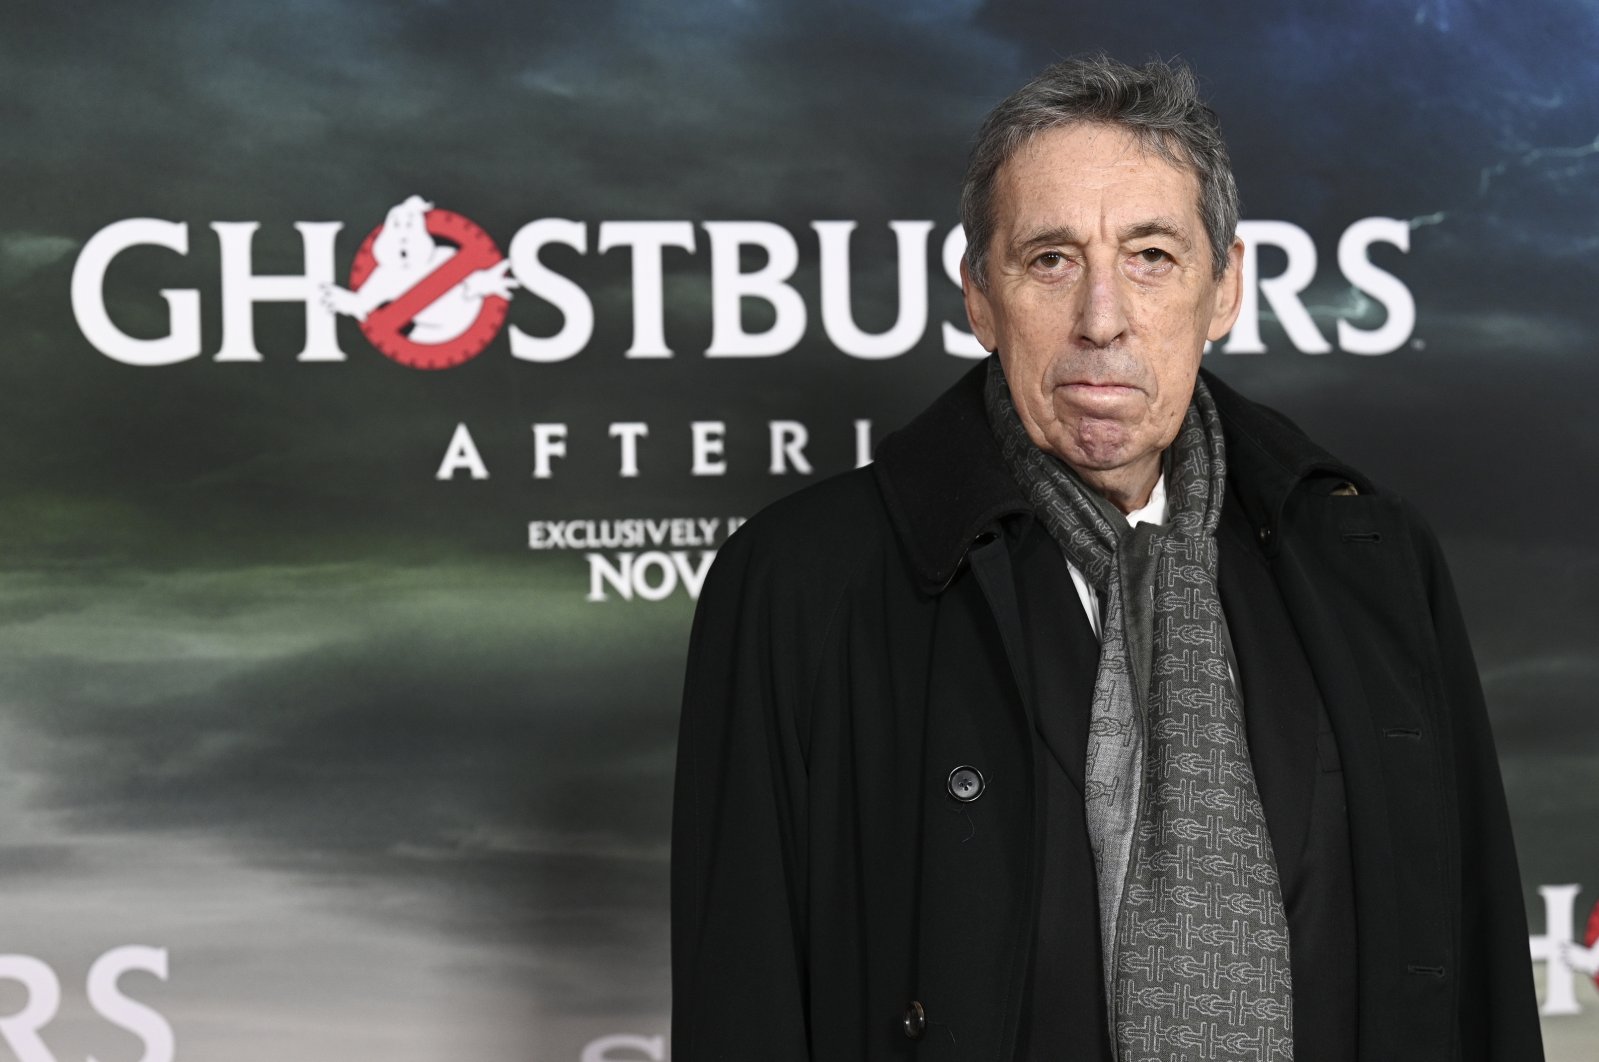 Producer Ivan Reitman attends the premiere of &quot;Ghostbusters: Afterlife&quot; at AMC Lincoln Square 13, New York, U.S., Nov. 15, 2021. (AP Photo)